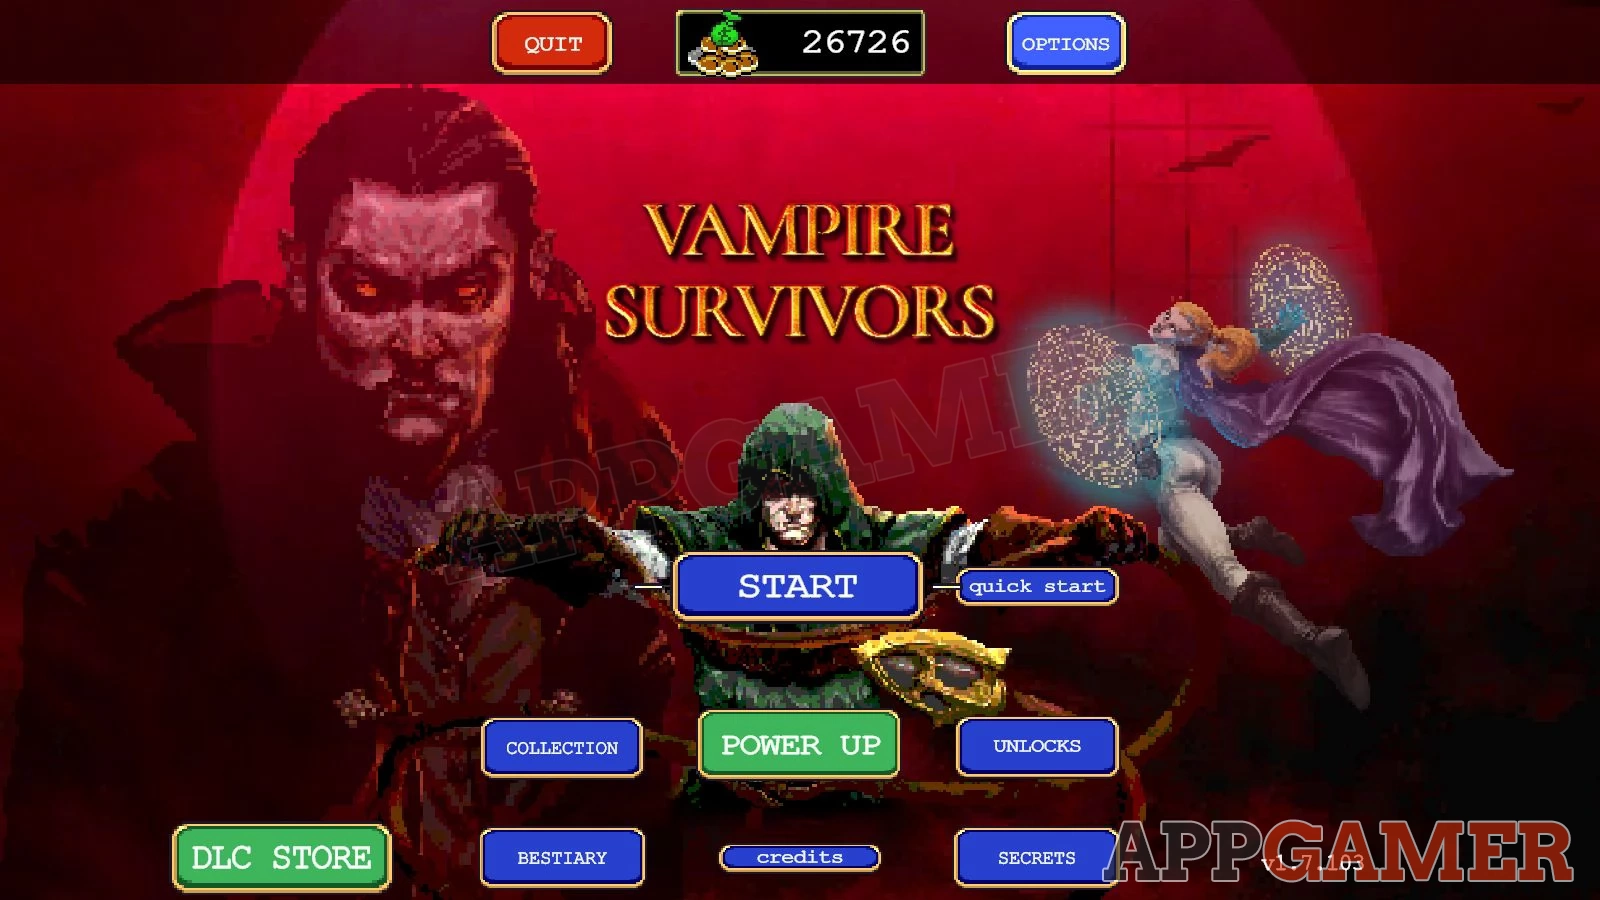 How To Use Secret Cheat Codes In Vampire Survivors